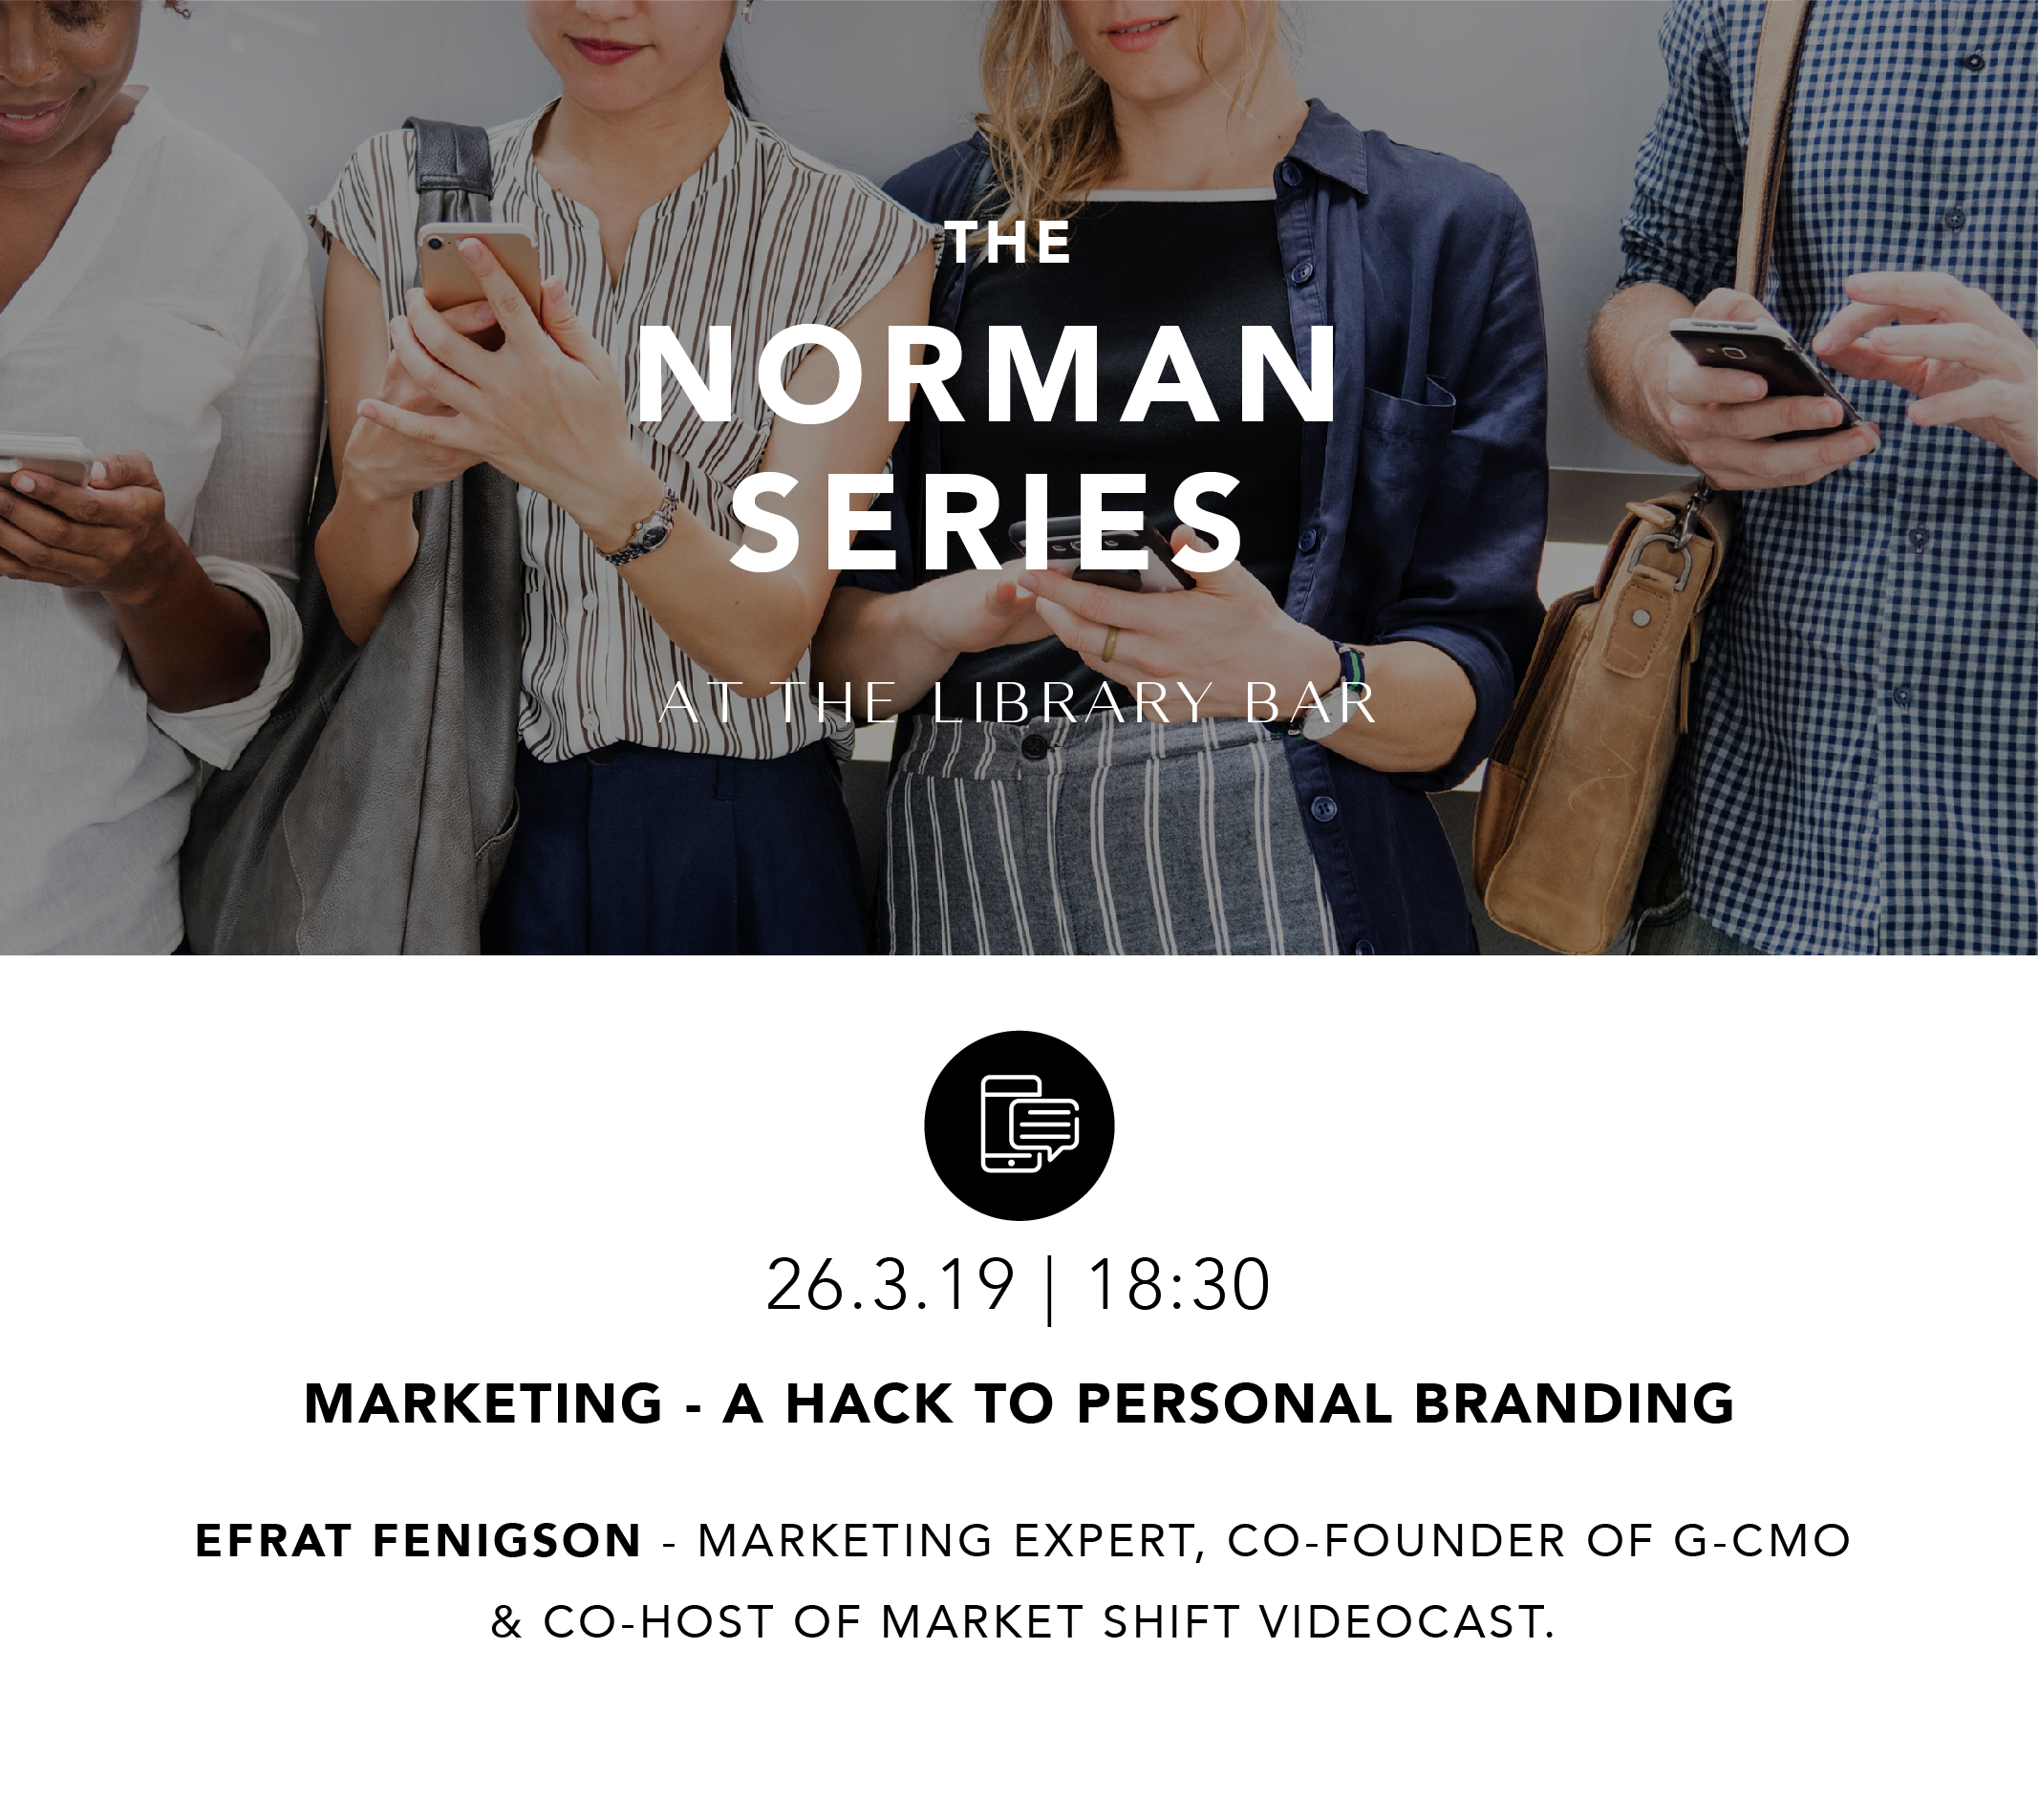 Marketing - a hack to personal branding - 26.3.19 - 18:30